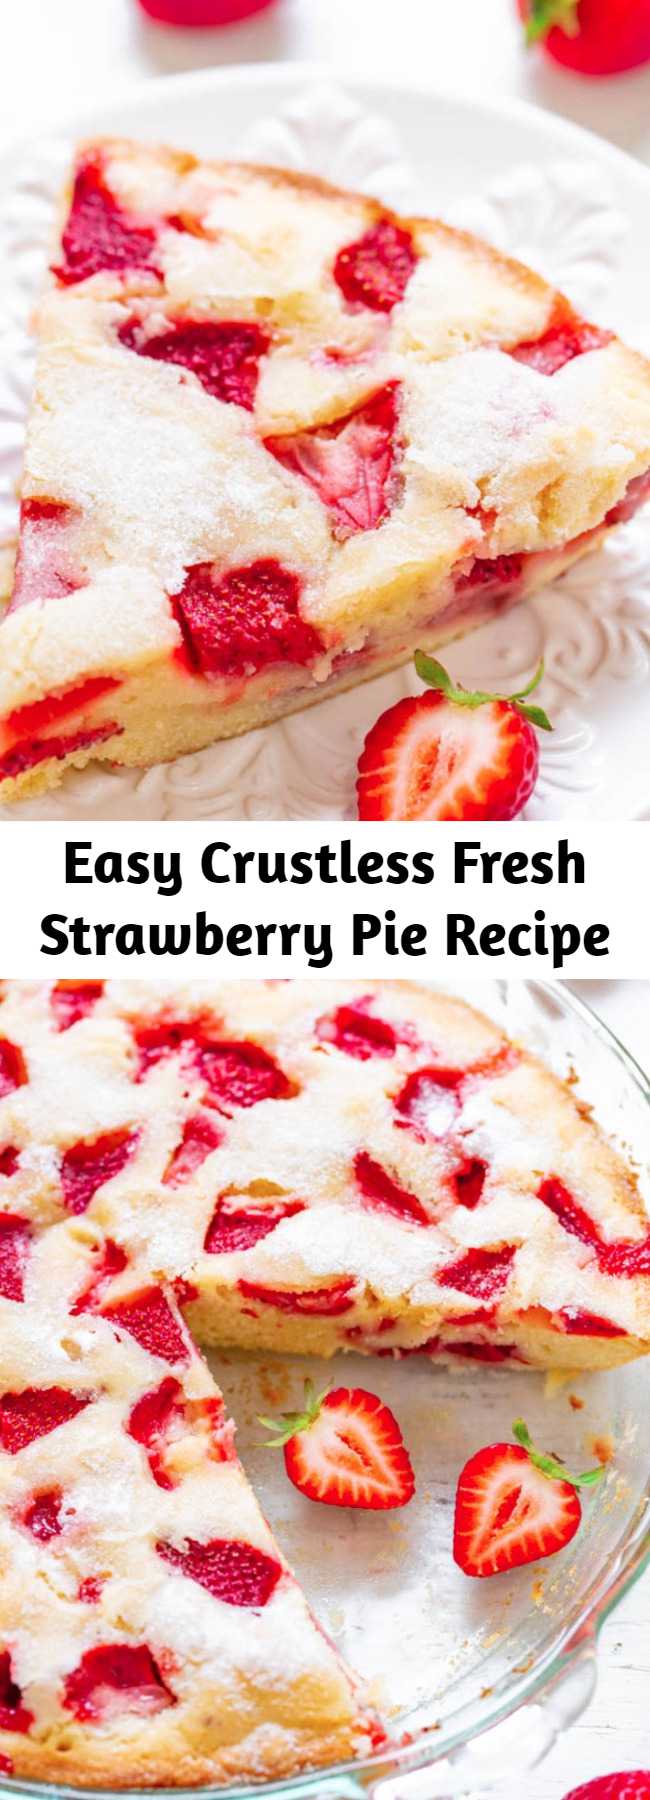 Easy Crustless Fresh Strawberry Pie Recipe - FAST, super EASY, no-mixer dessert that’s perfect for summer entertaining, picnics, or potlucks!! Somewhere in between pie, cake, and blondies is what you get with this FABULOUS recipe! Take advantage of those FRESH strawberries!!